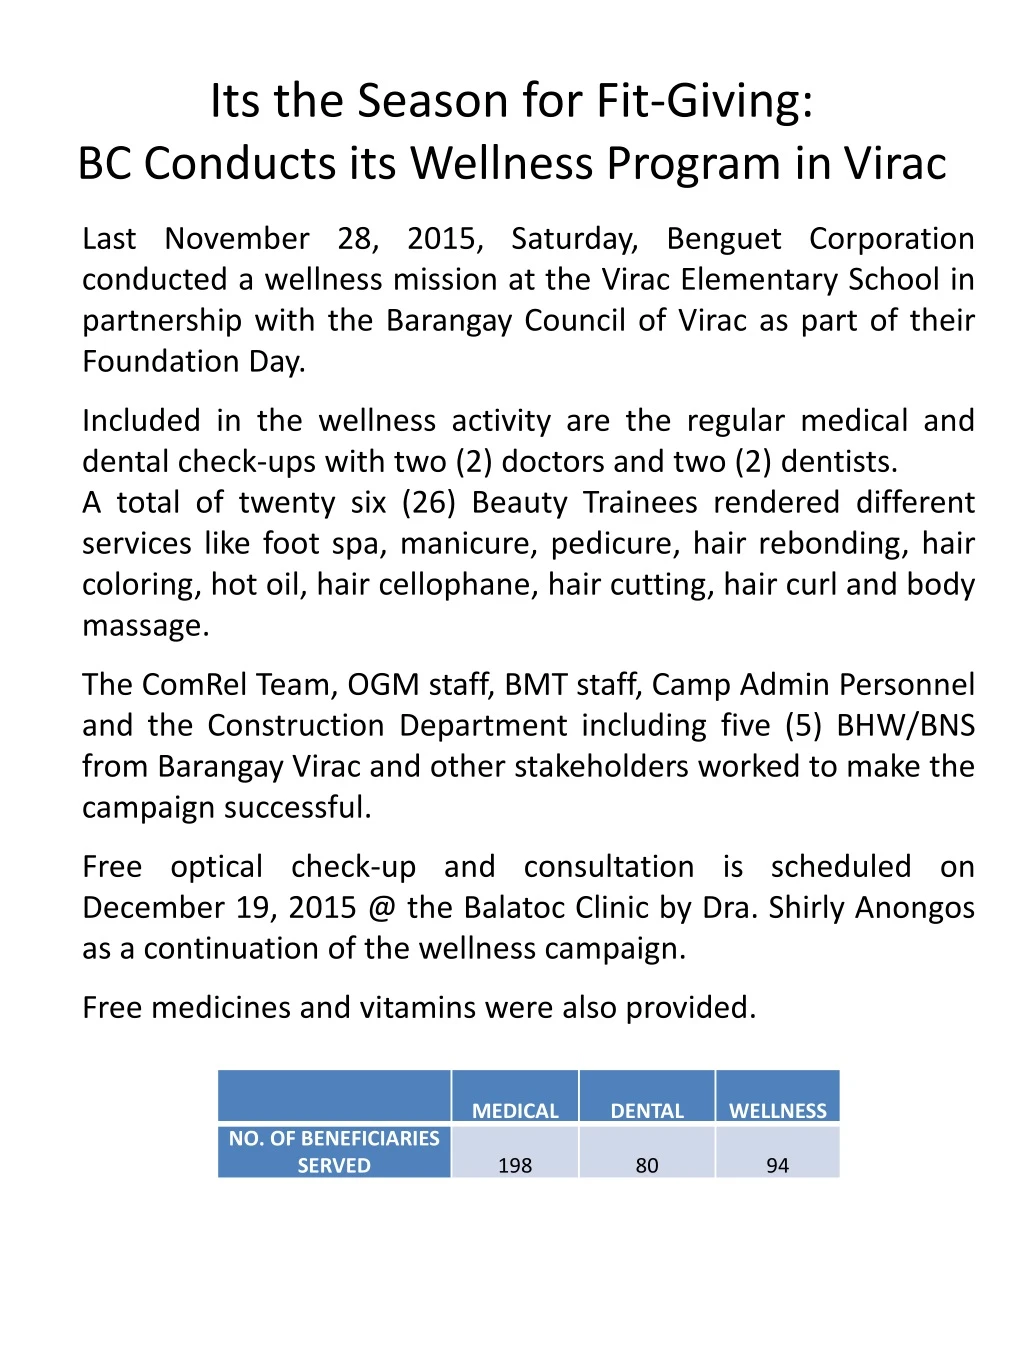 its the season for fit giving bc conducts its wellness program in virac